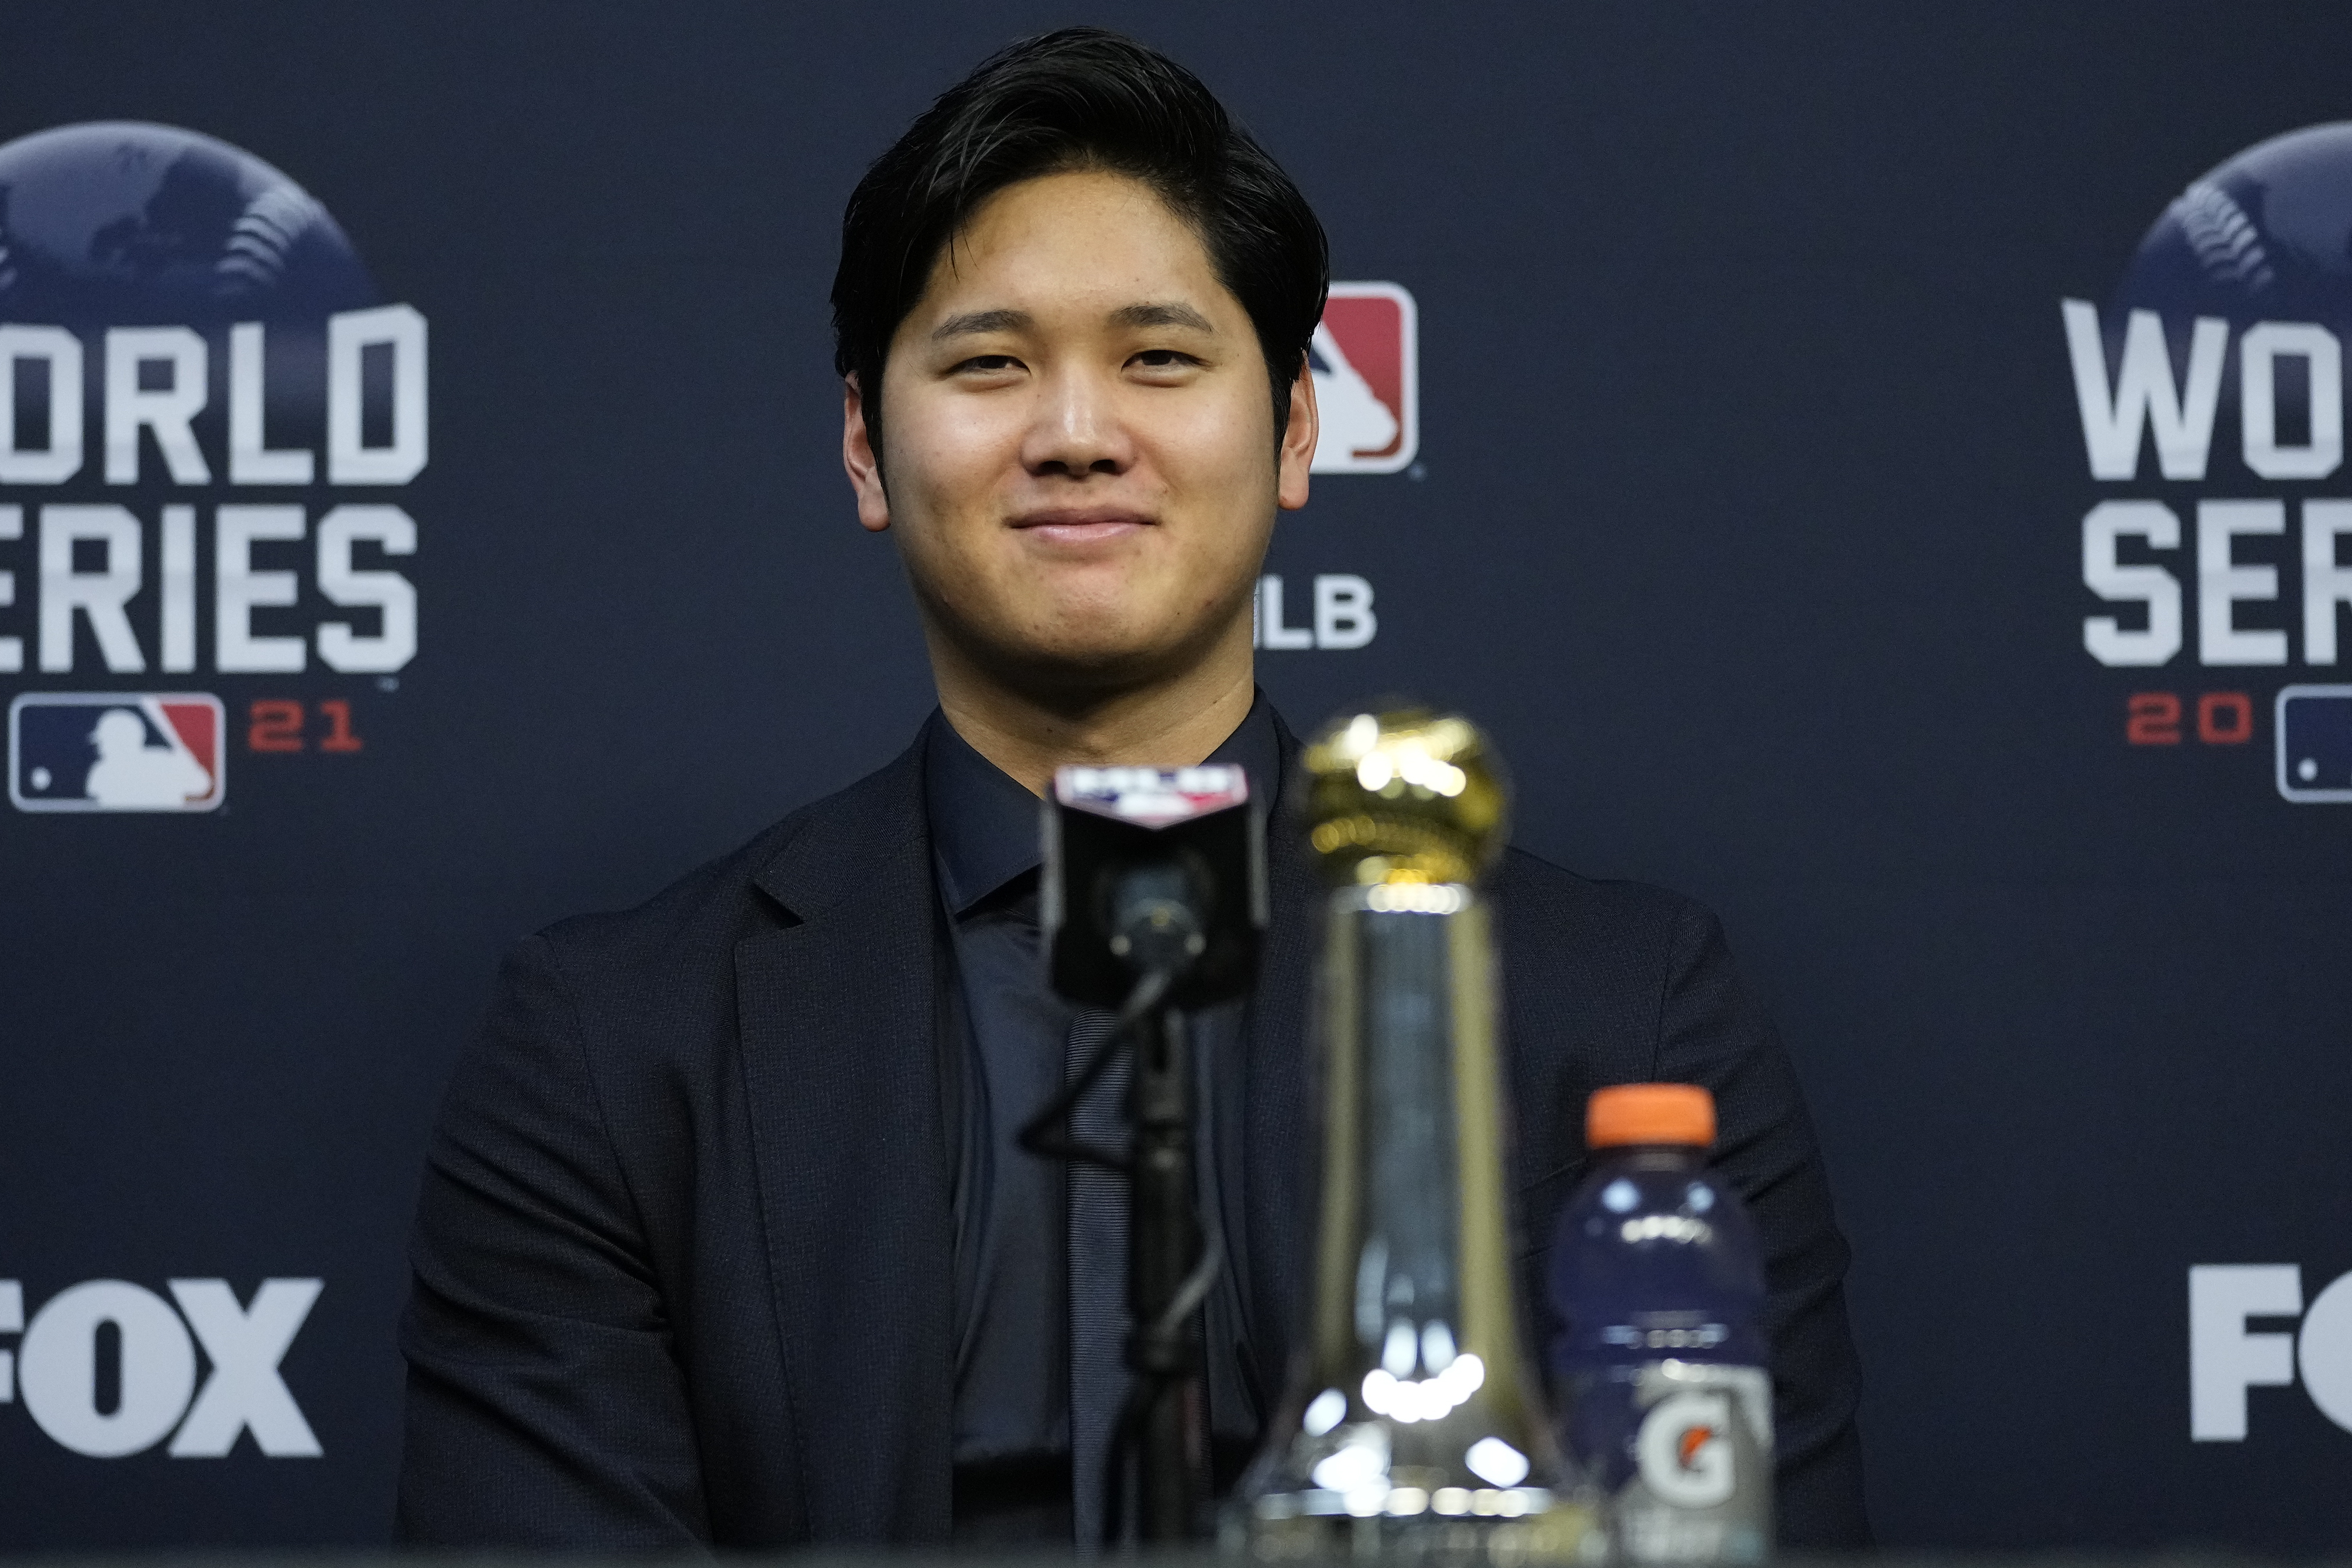 Ohtani gets special award from MLB for 2-way All-Star season